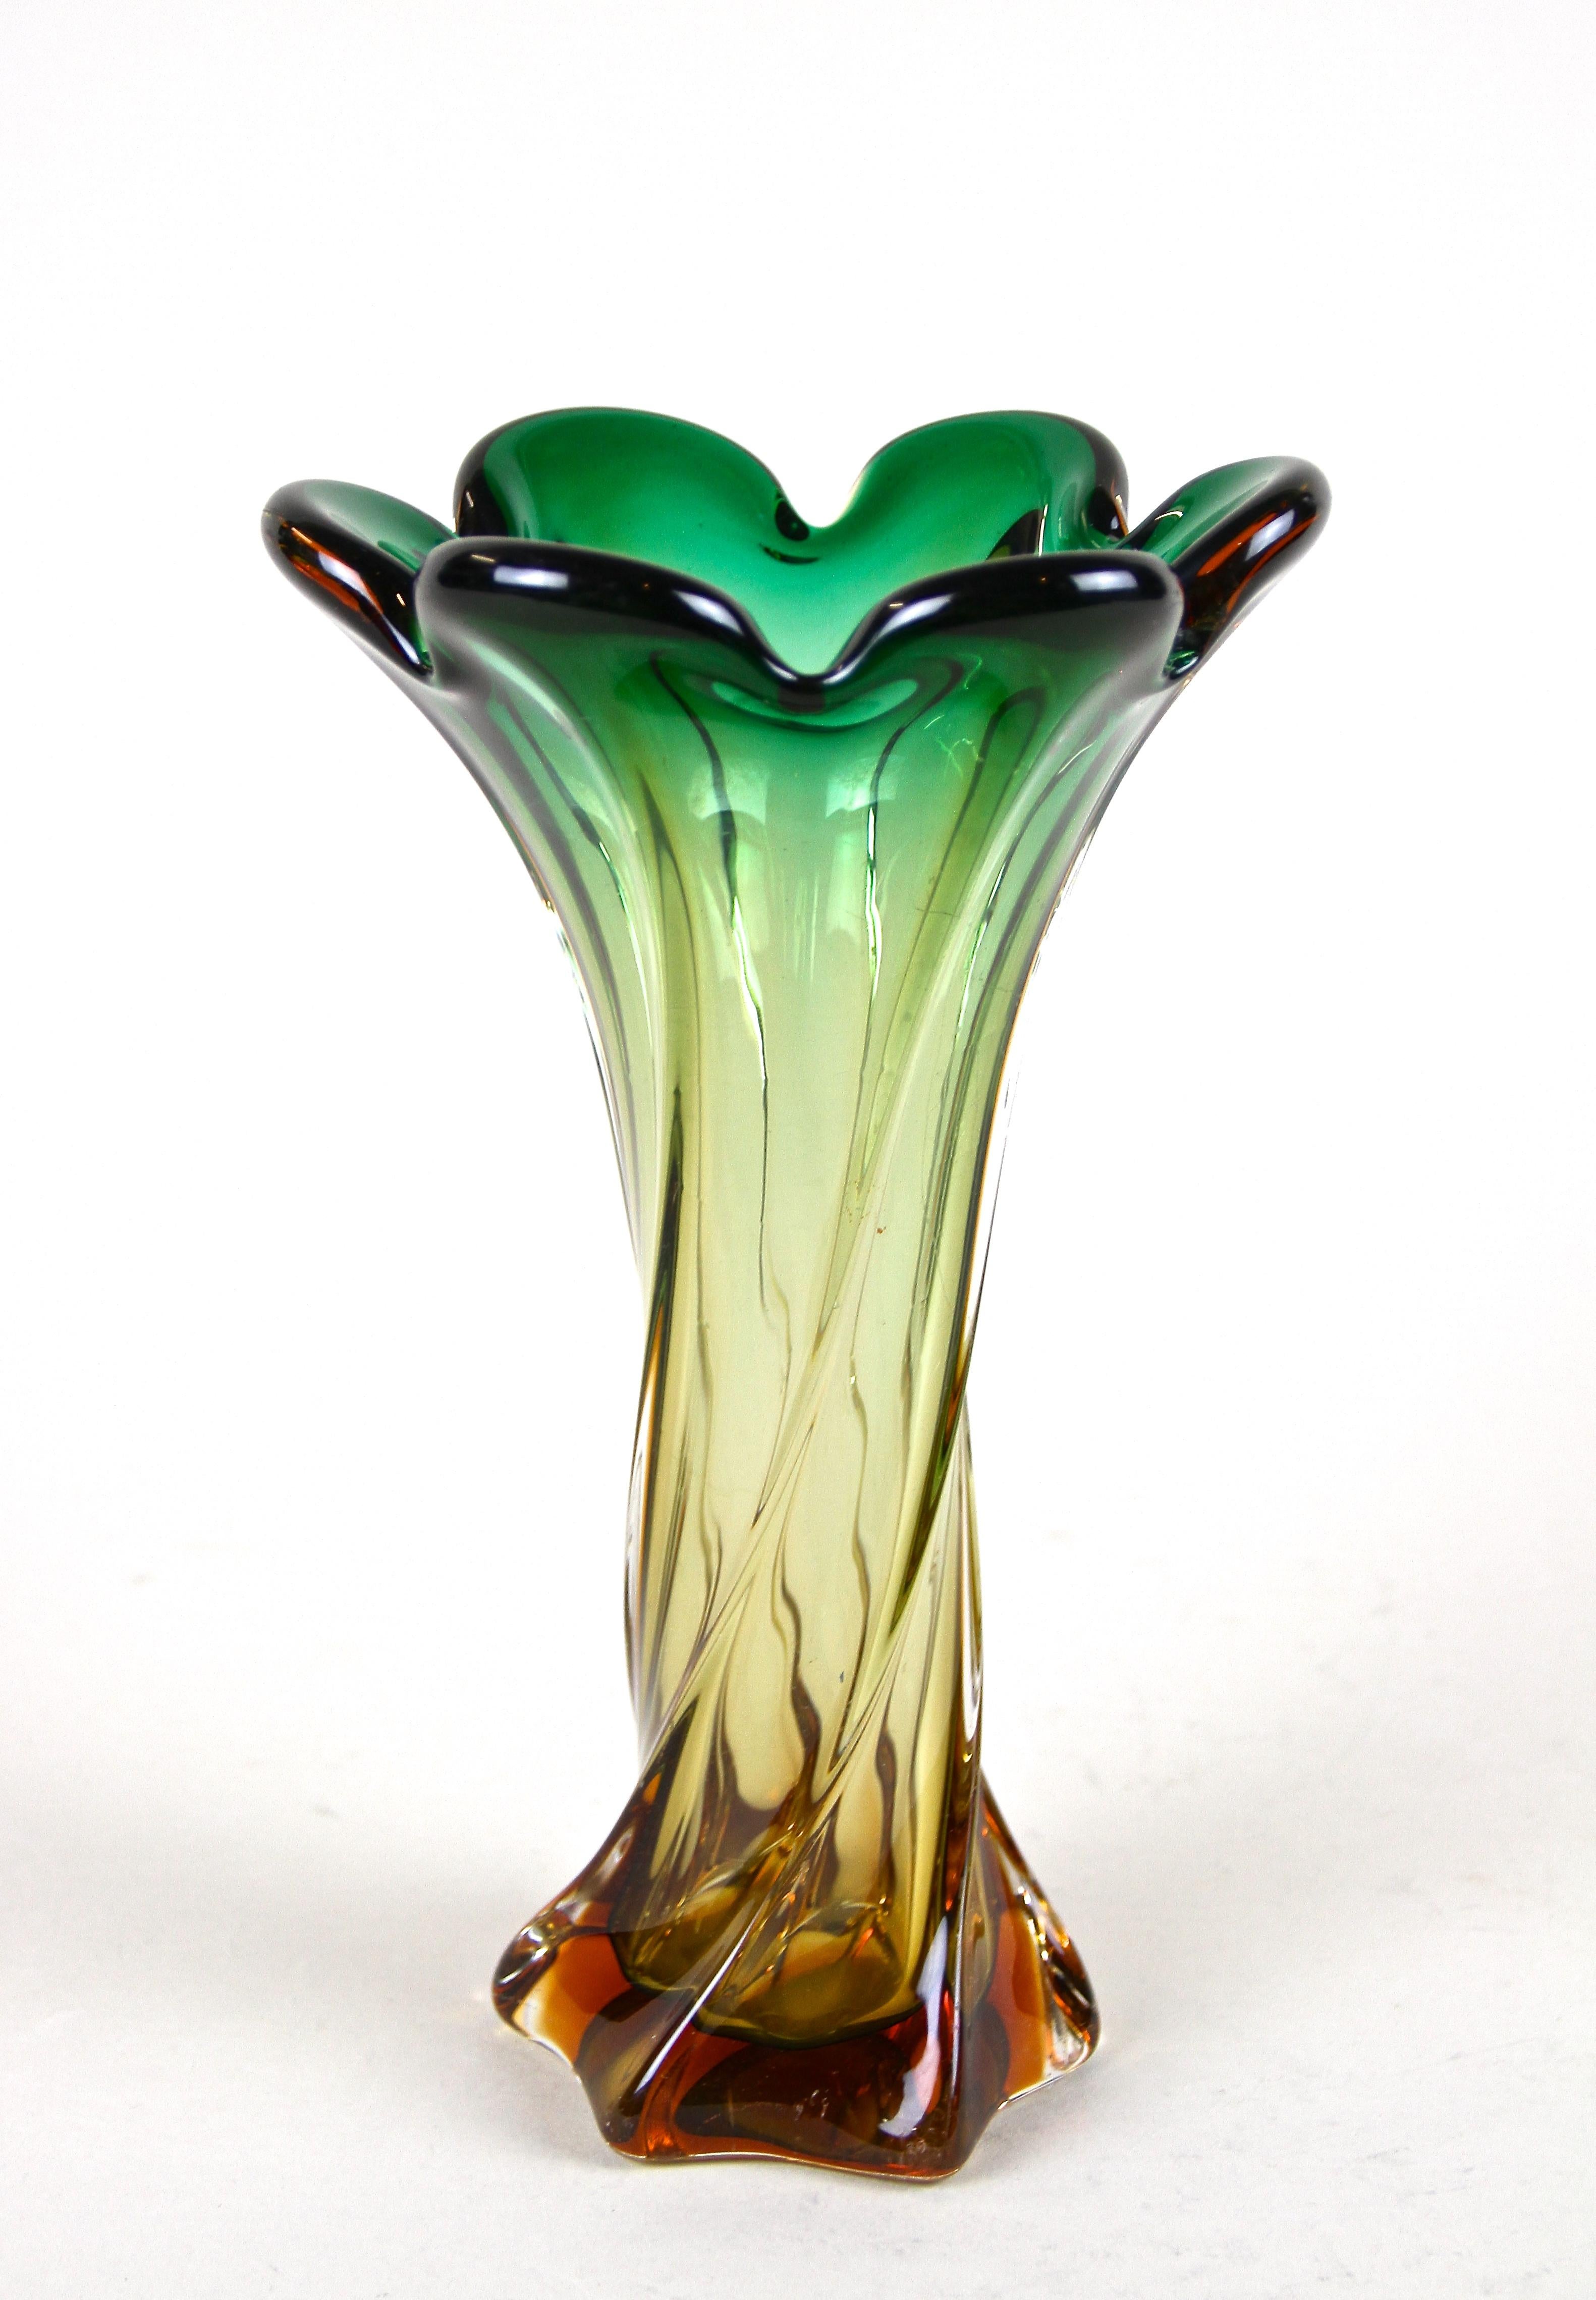 Fantastic looking, large mid century Murano glass vase out of the renown glass art workshops of Sommerso in Venetia. Artfully made in Italy around 1960/70 this lovely shaped glass vase impresses with an amazing coloration going from a beautiful